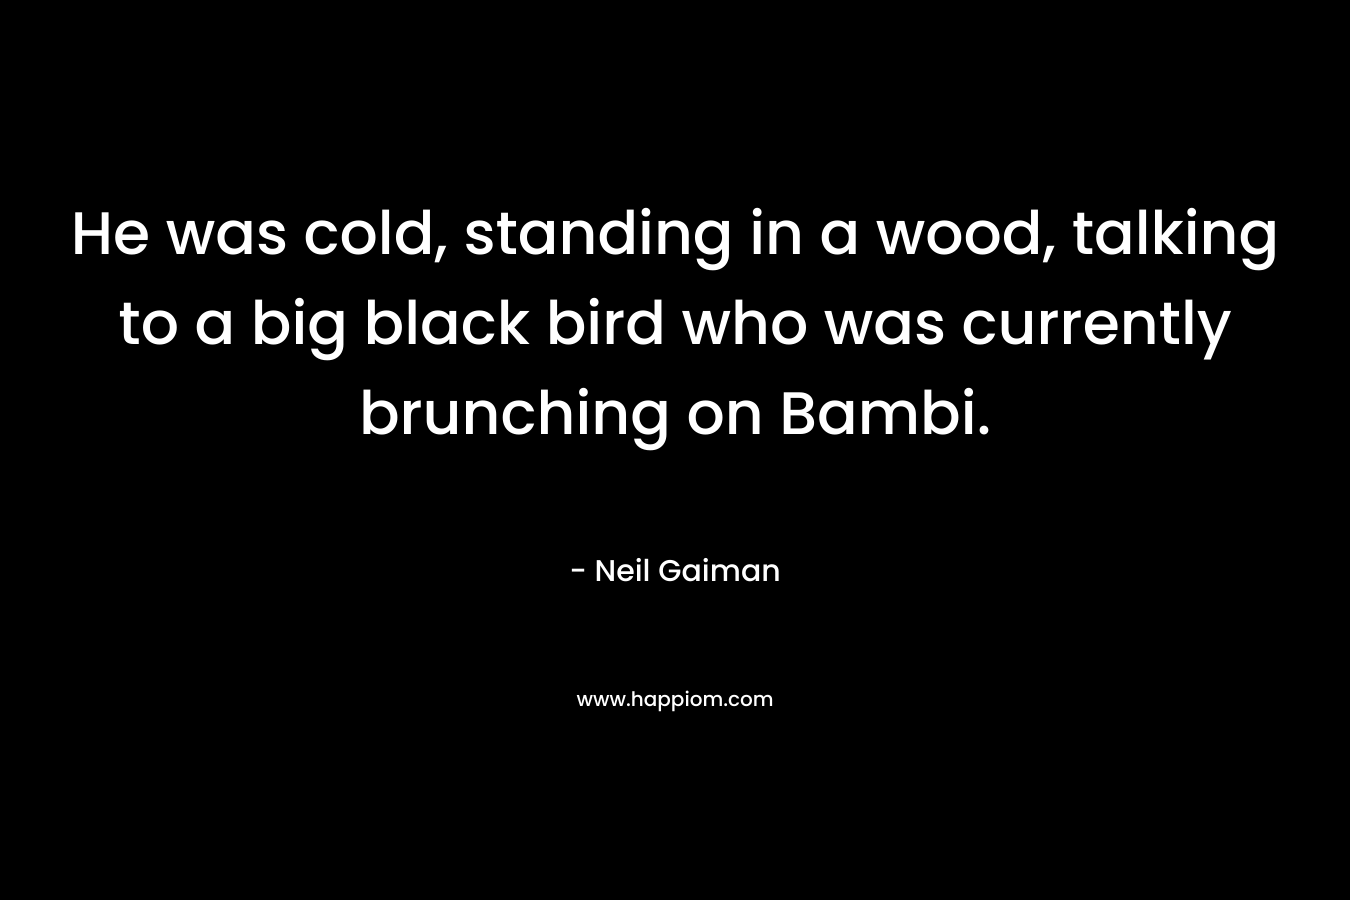 He was cold, standing in a wood, talking to a big black bird who was currently brunching on Bambi.